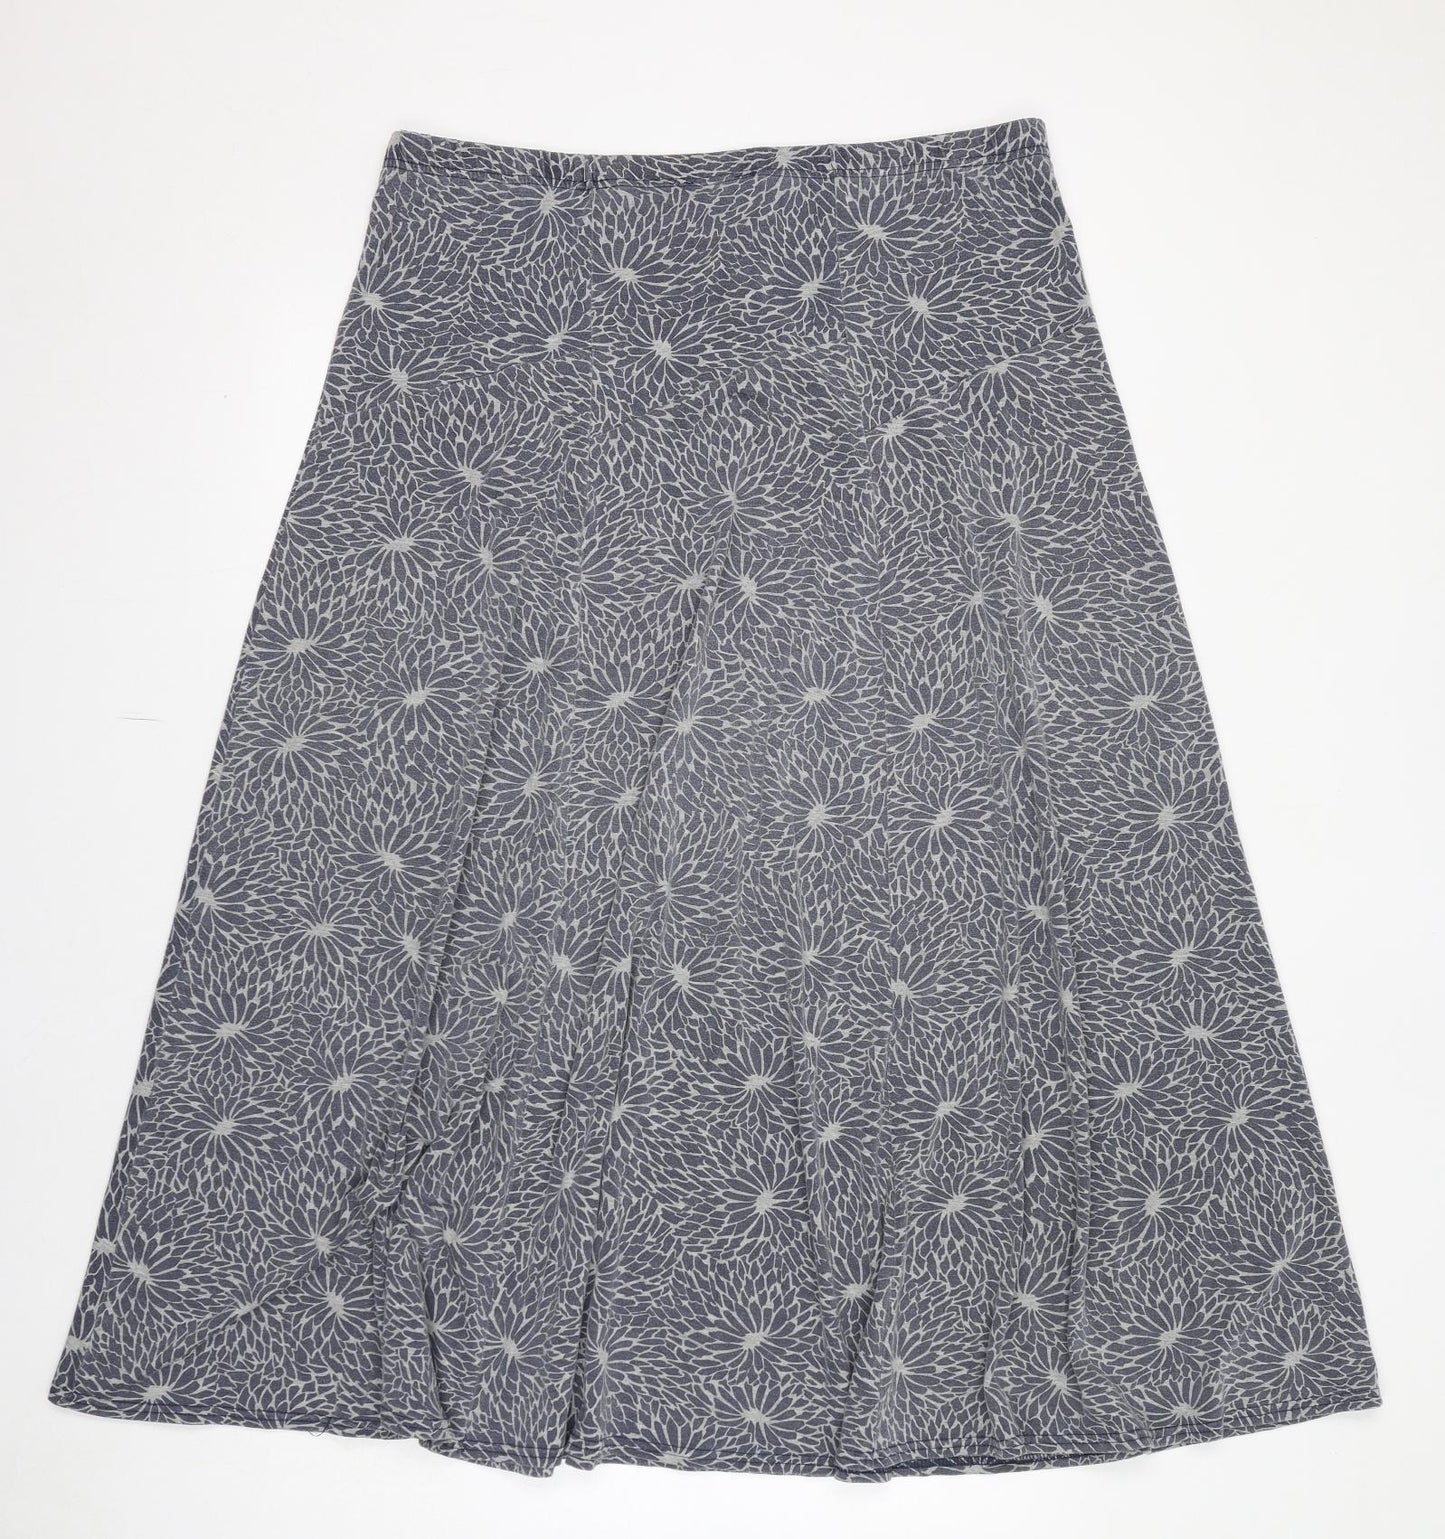 Yours Womens Grey Floral Polyester Swing Skirt Size 20